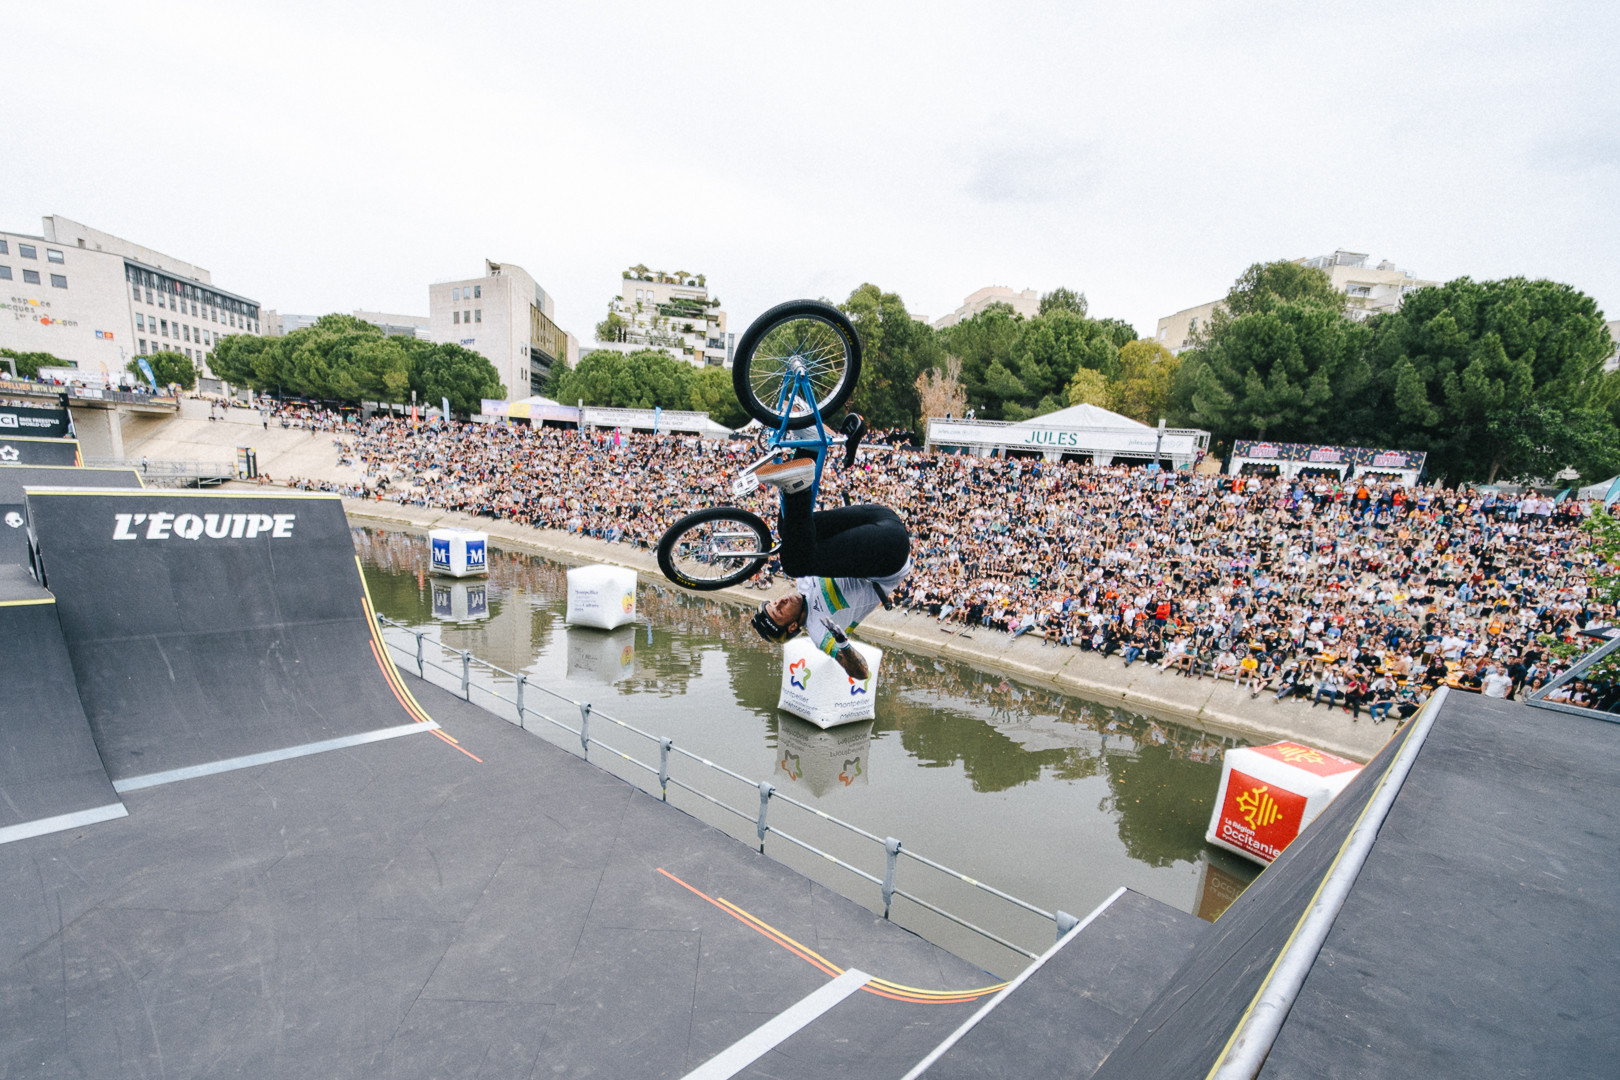 Australian Martin amassed 94.20 points to pip a 24-man field, with a triple tailwhip the highlight of his two runs ©Hurricane-FISE